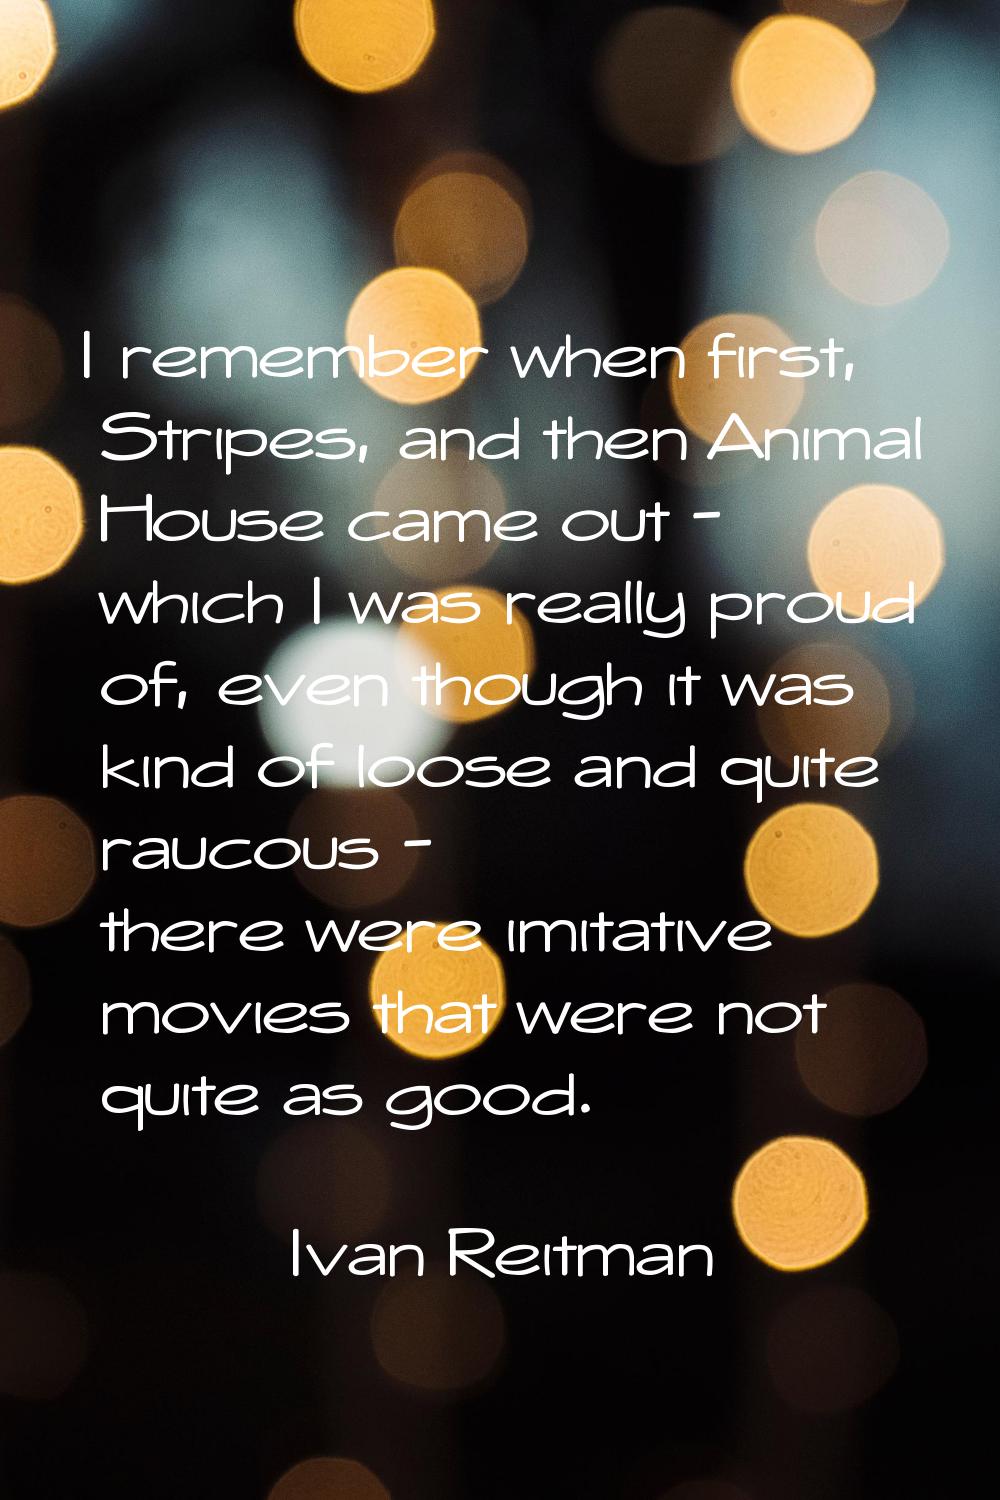 I remember when first, Stripes, and then Animal House came out - which I was really proud of, even 